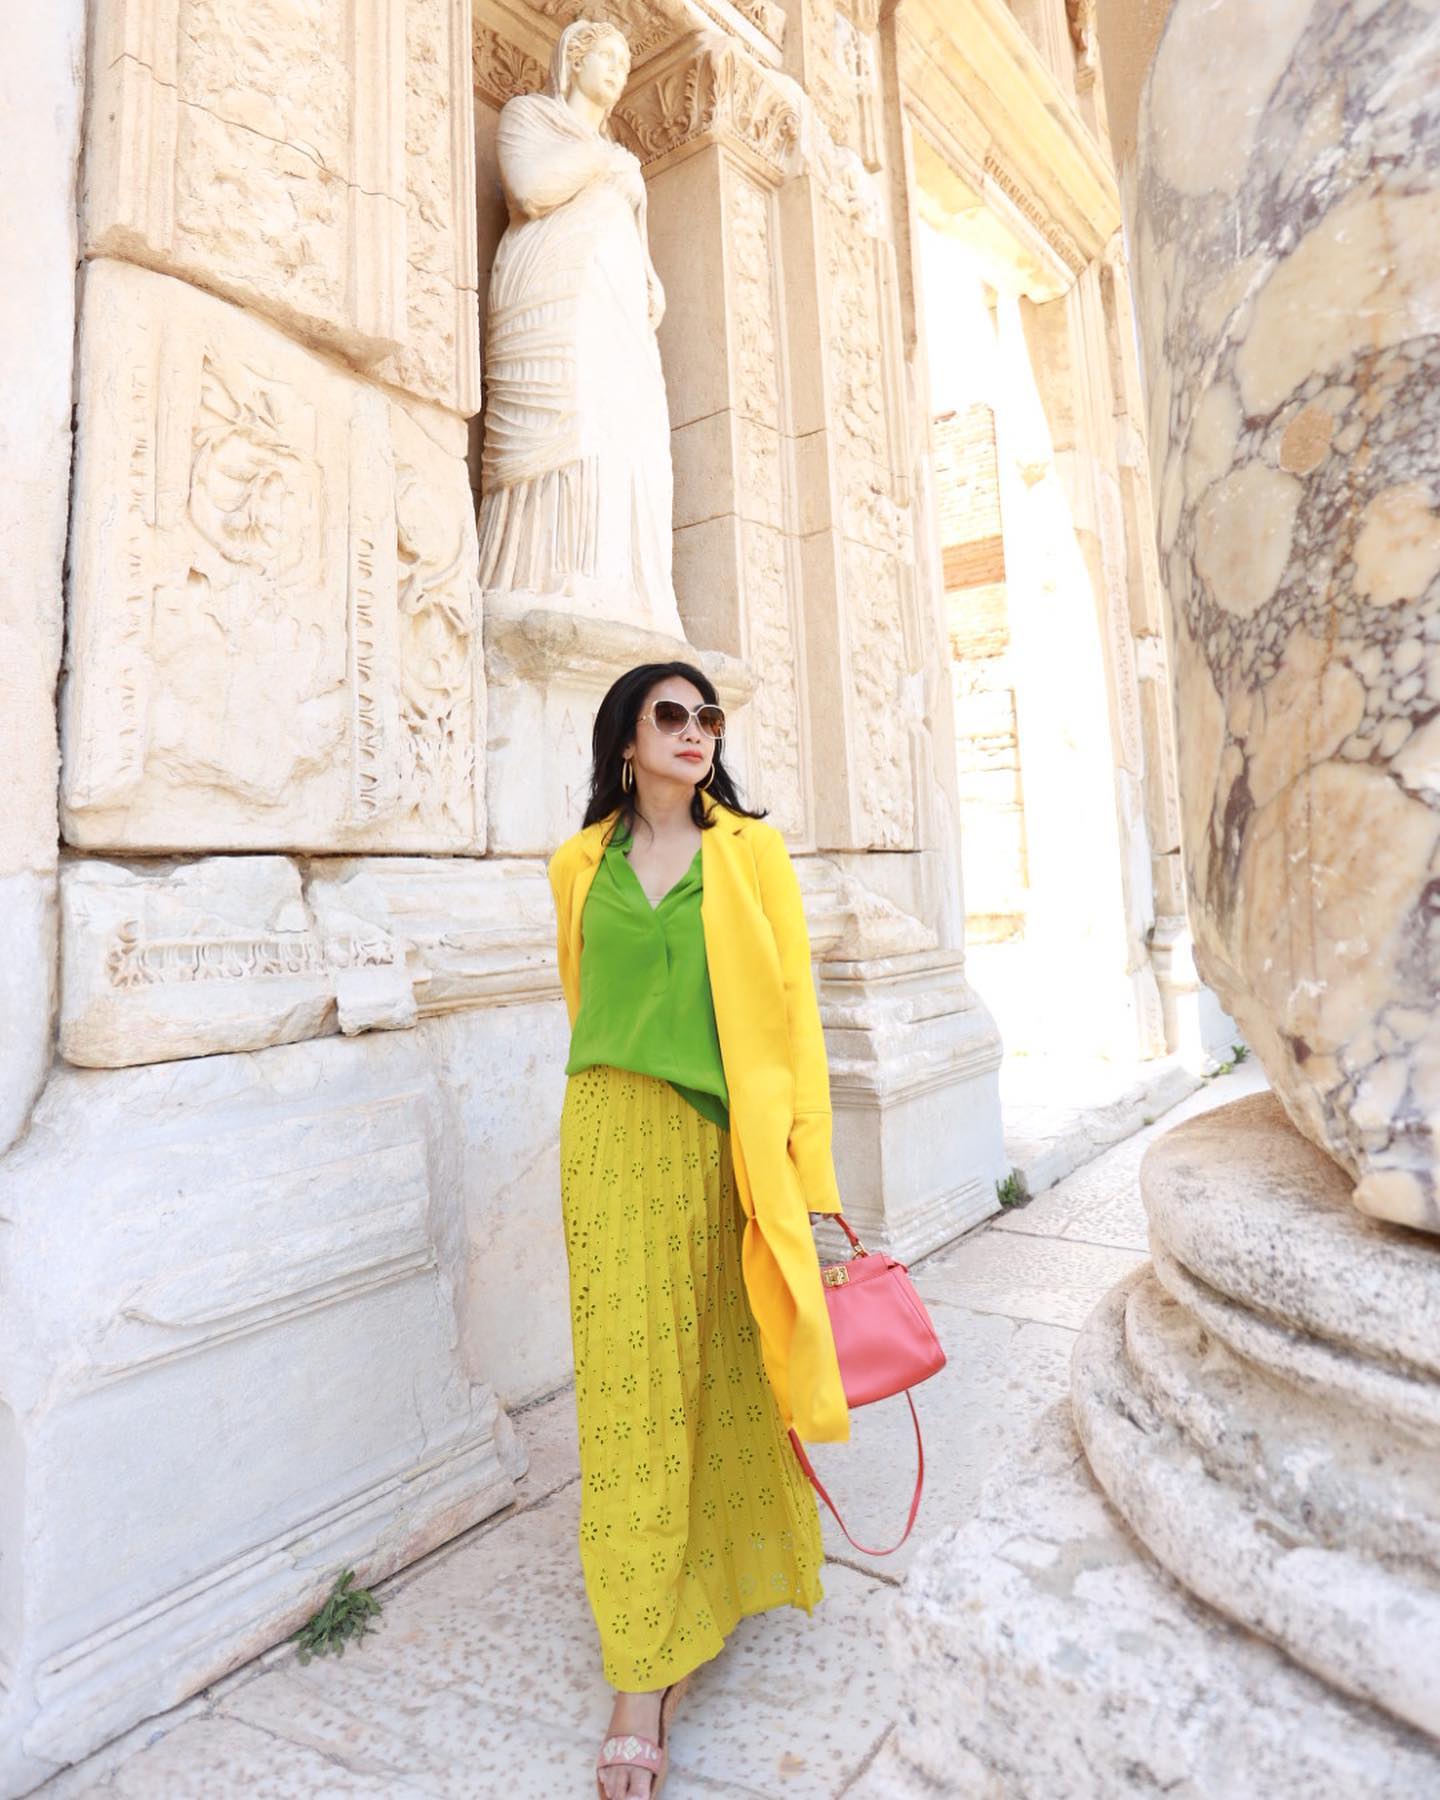 8 Photos of Feny Rose's Vacation in Turkey, Netizens Focus on Her ...